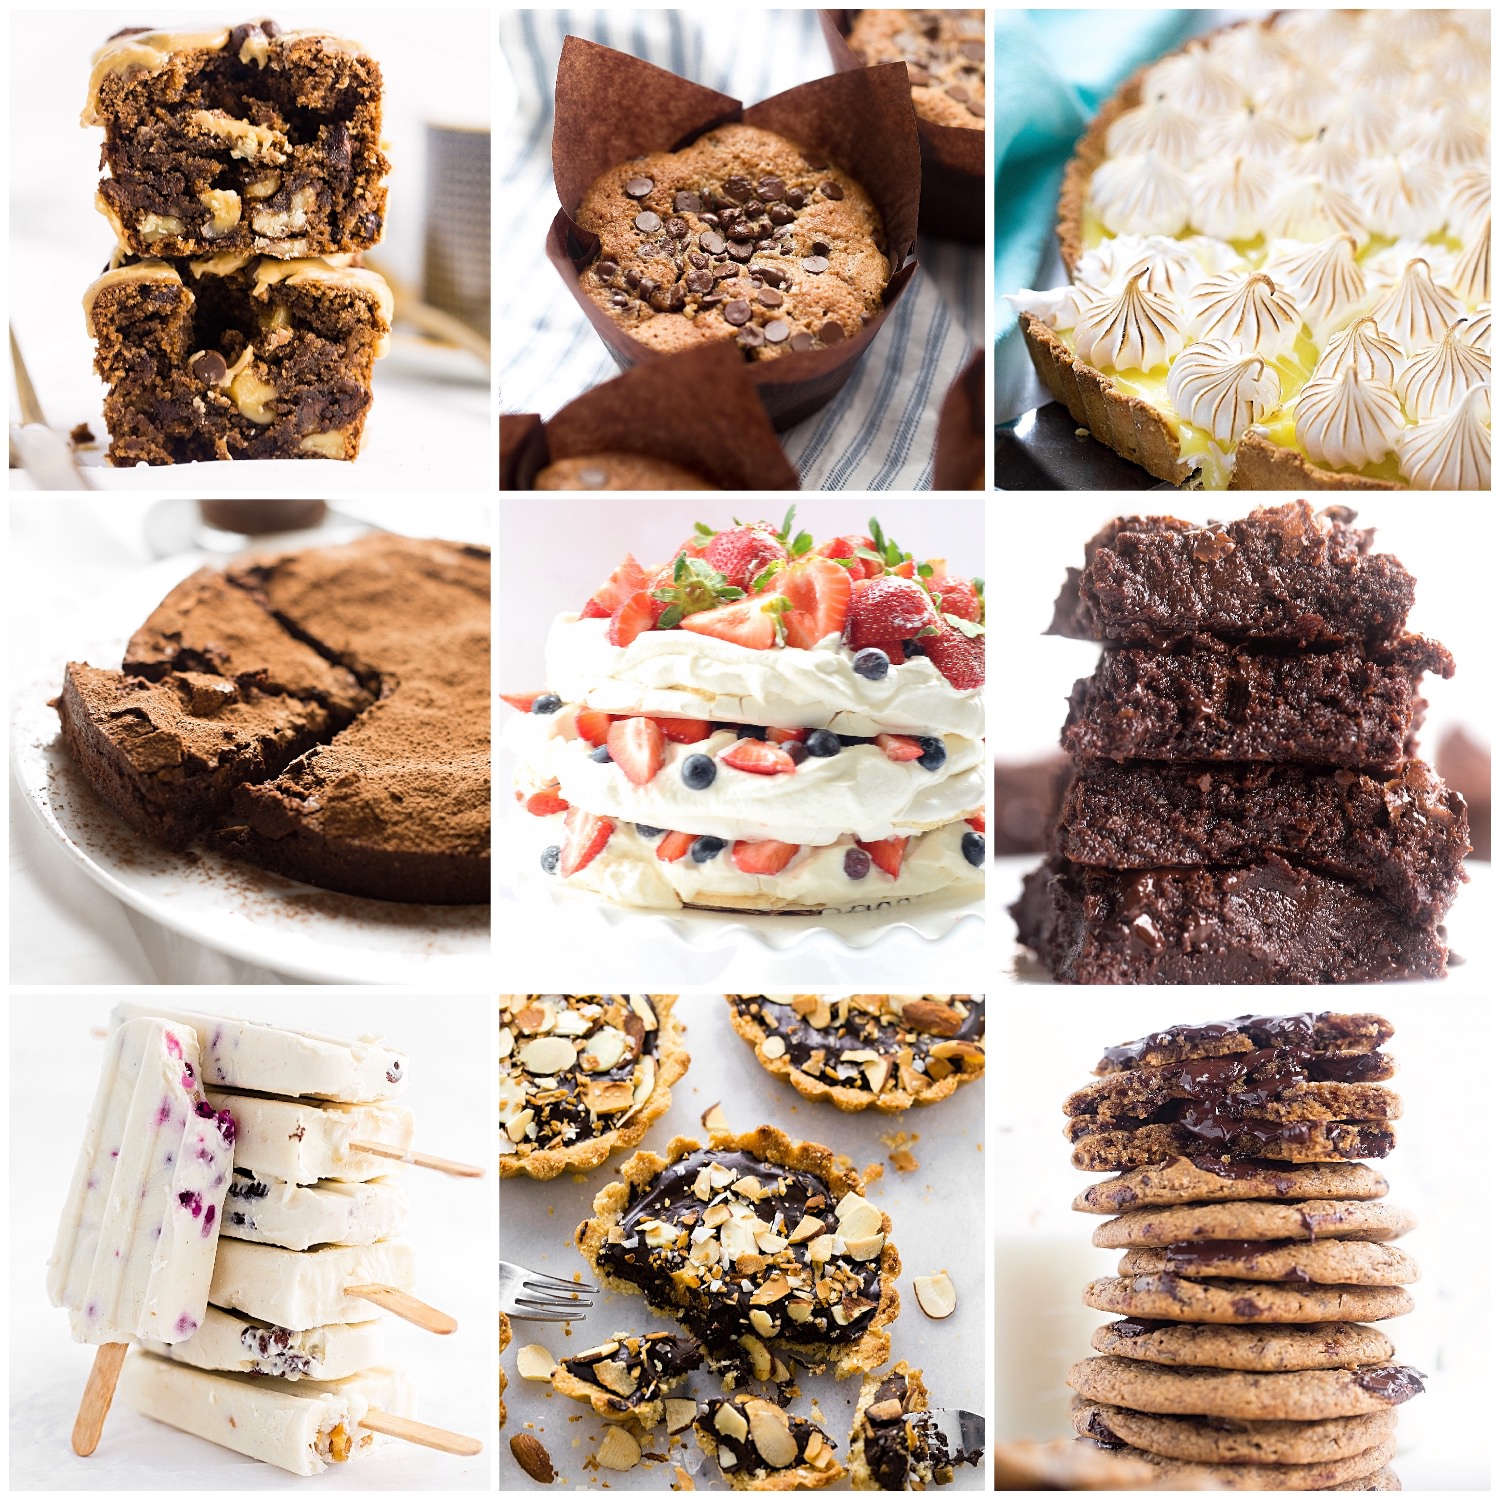 All the Passover Friendly Desserts from the Blog | Truffles and Trends